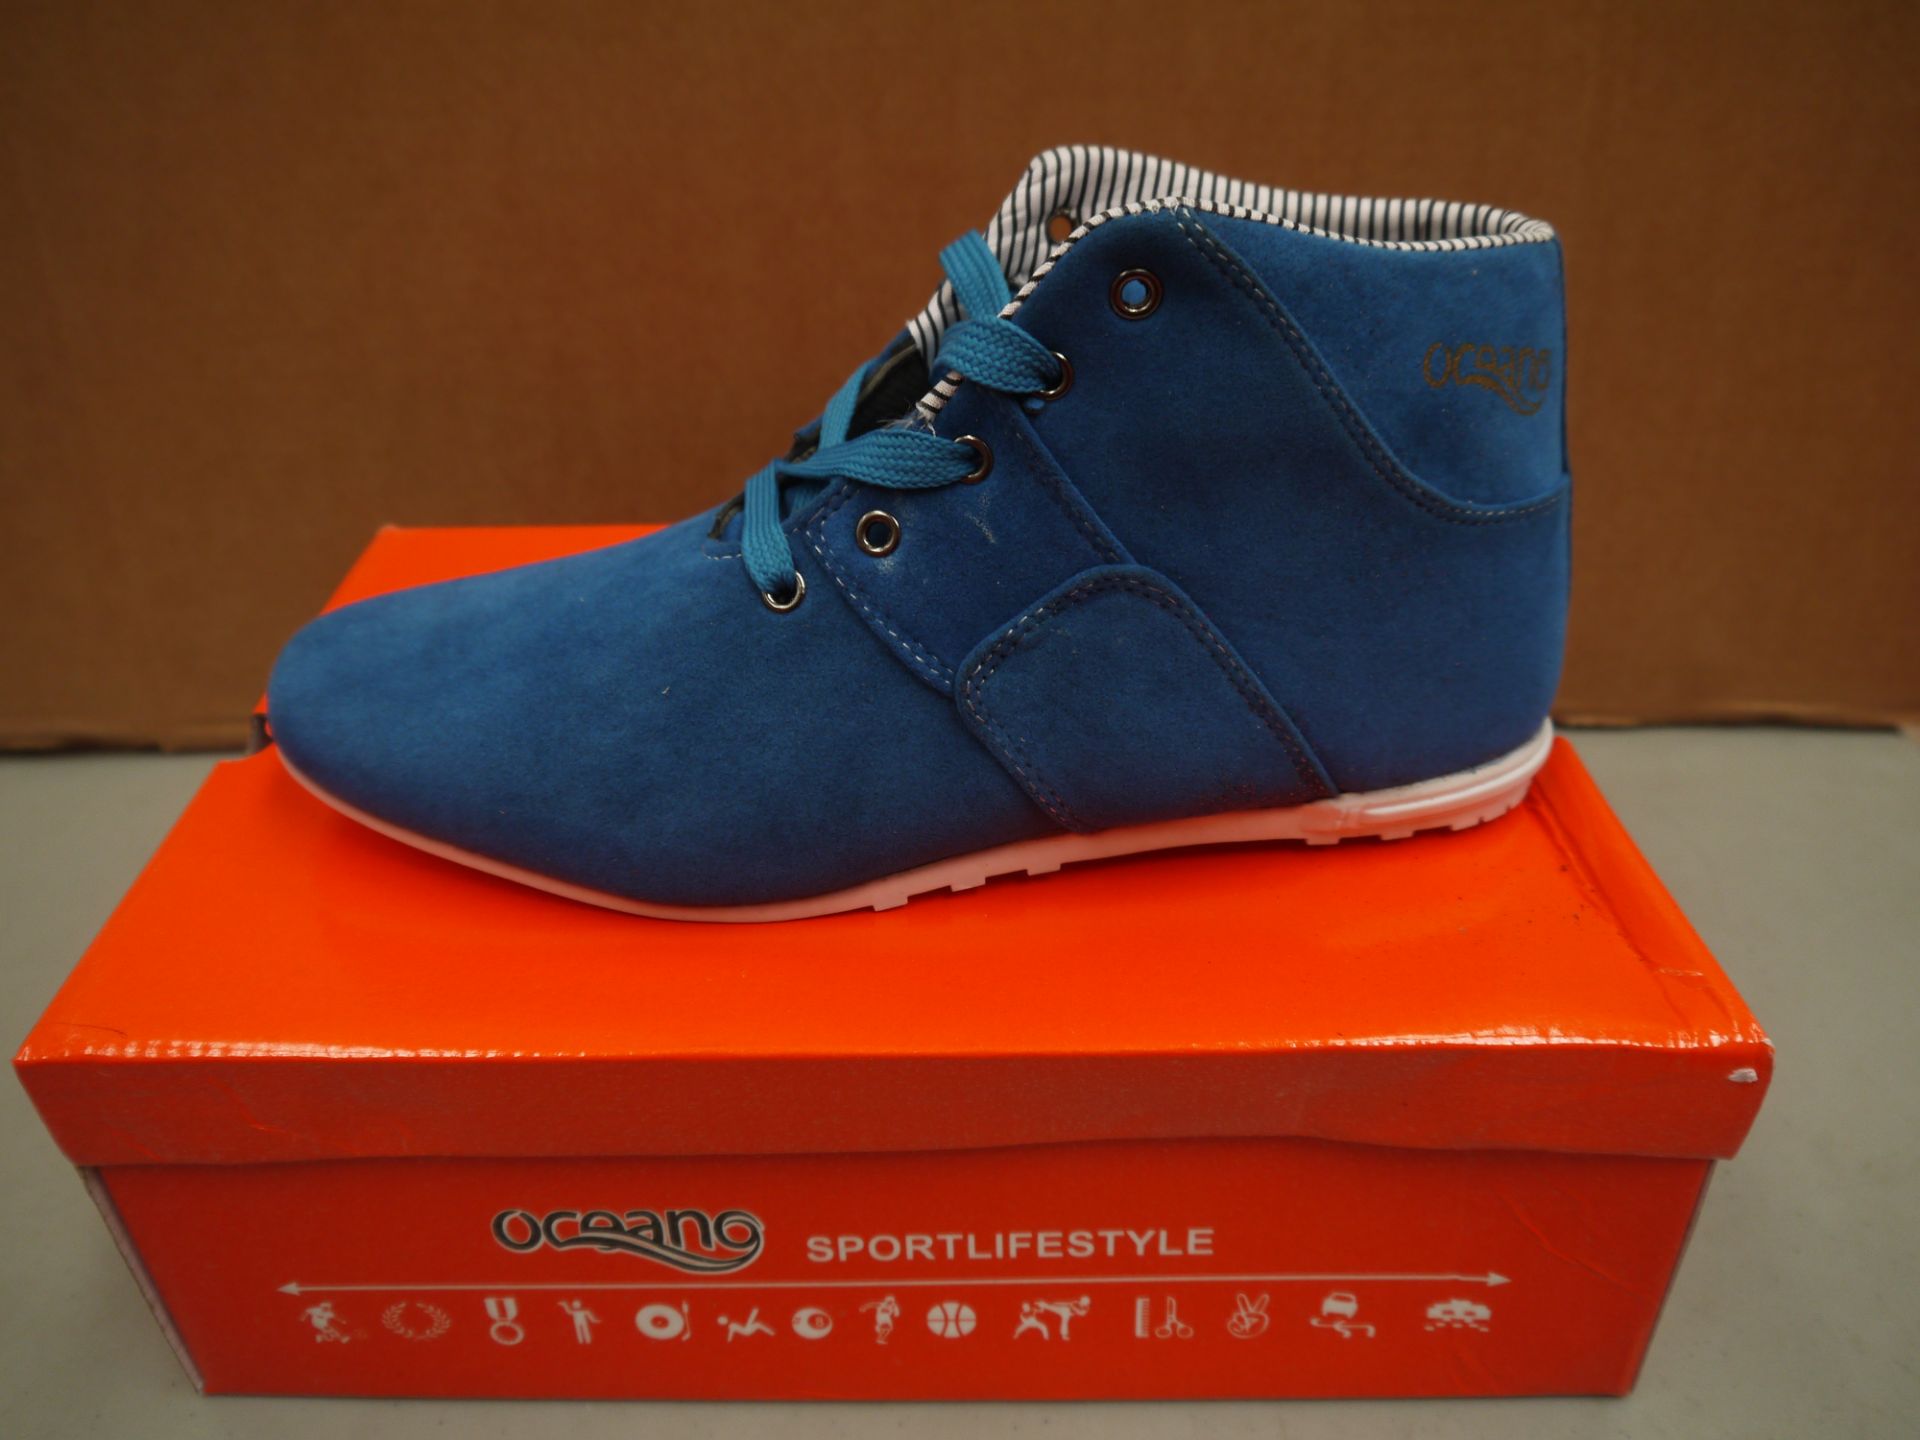 Mens Blue Suede Oceano trainer style boot new and boxed size UK10